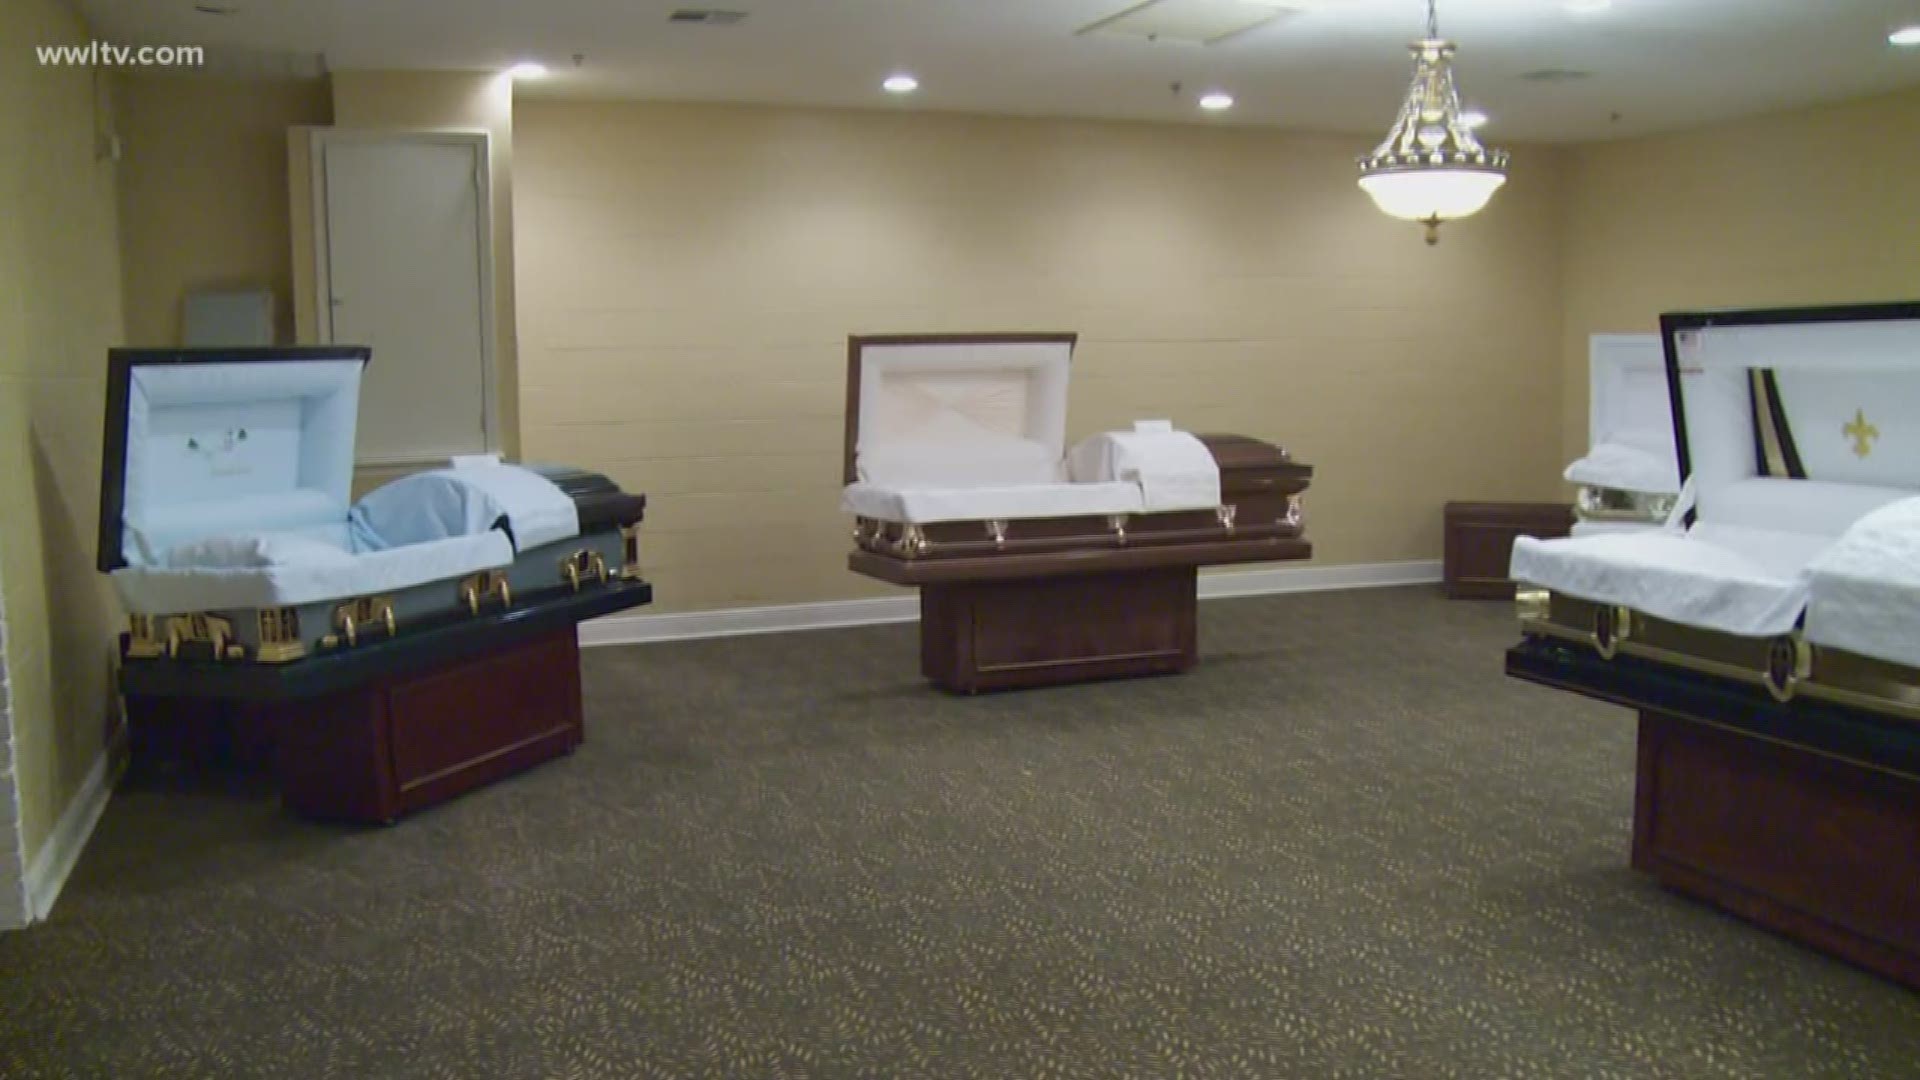 “One thing I just can come to grips with is the lack of touch,” said funeral director Kirk Barrow